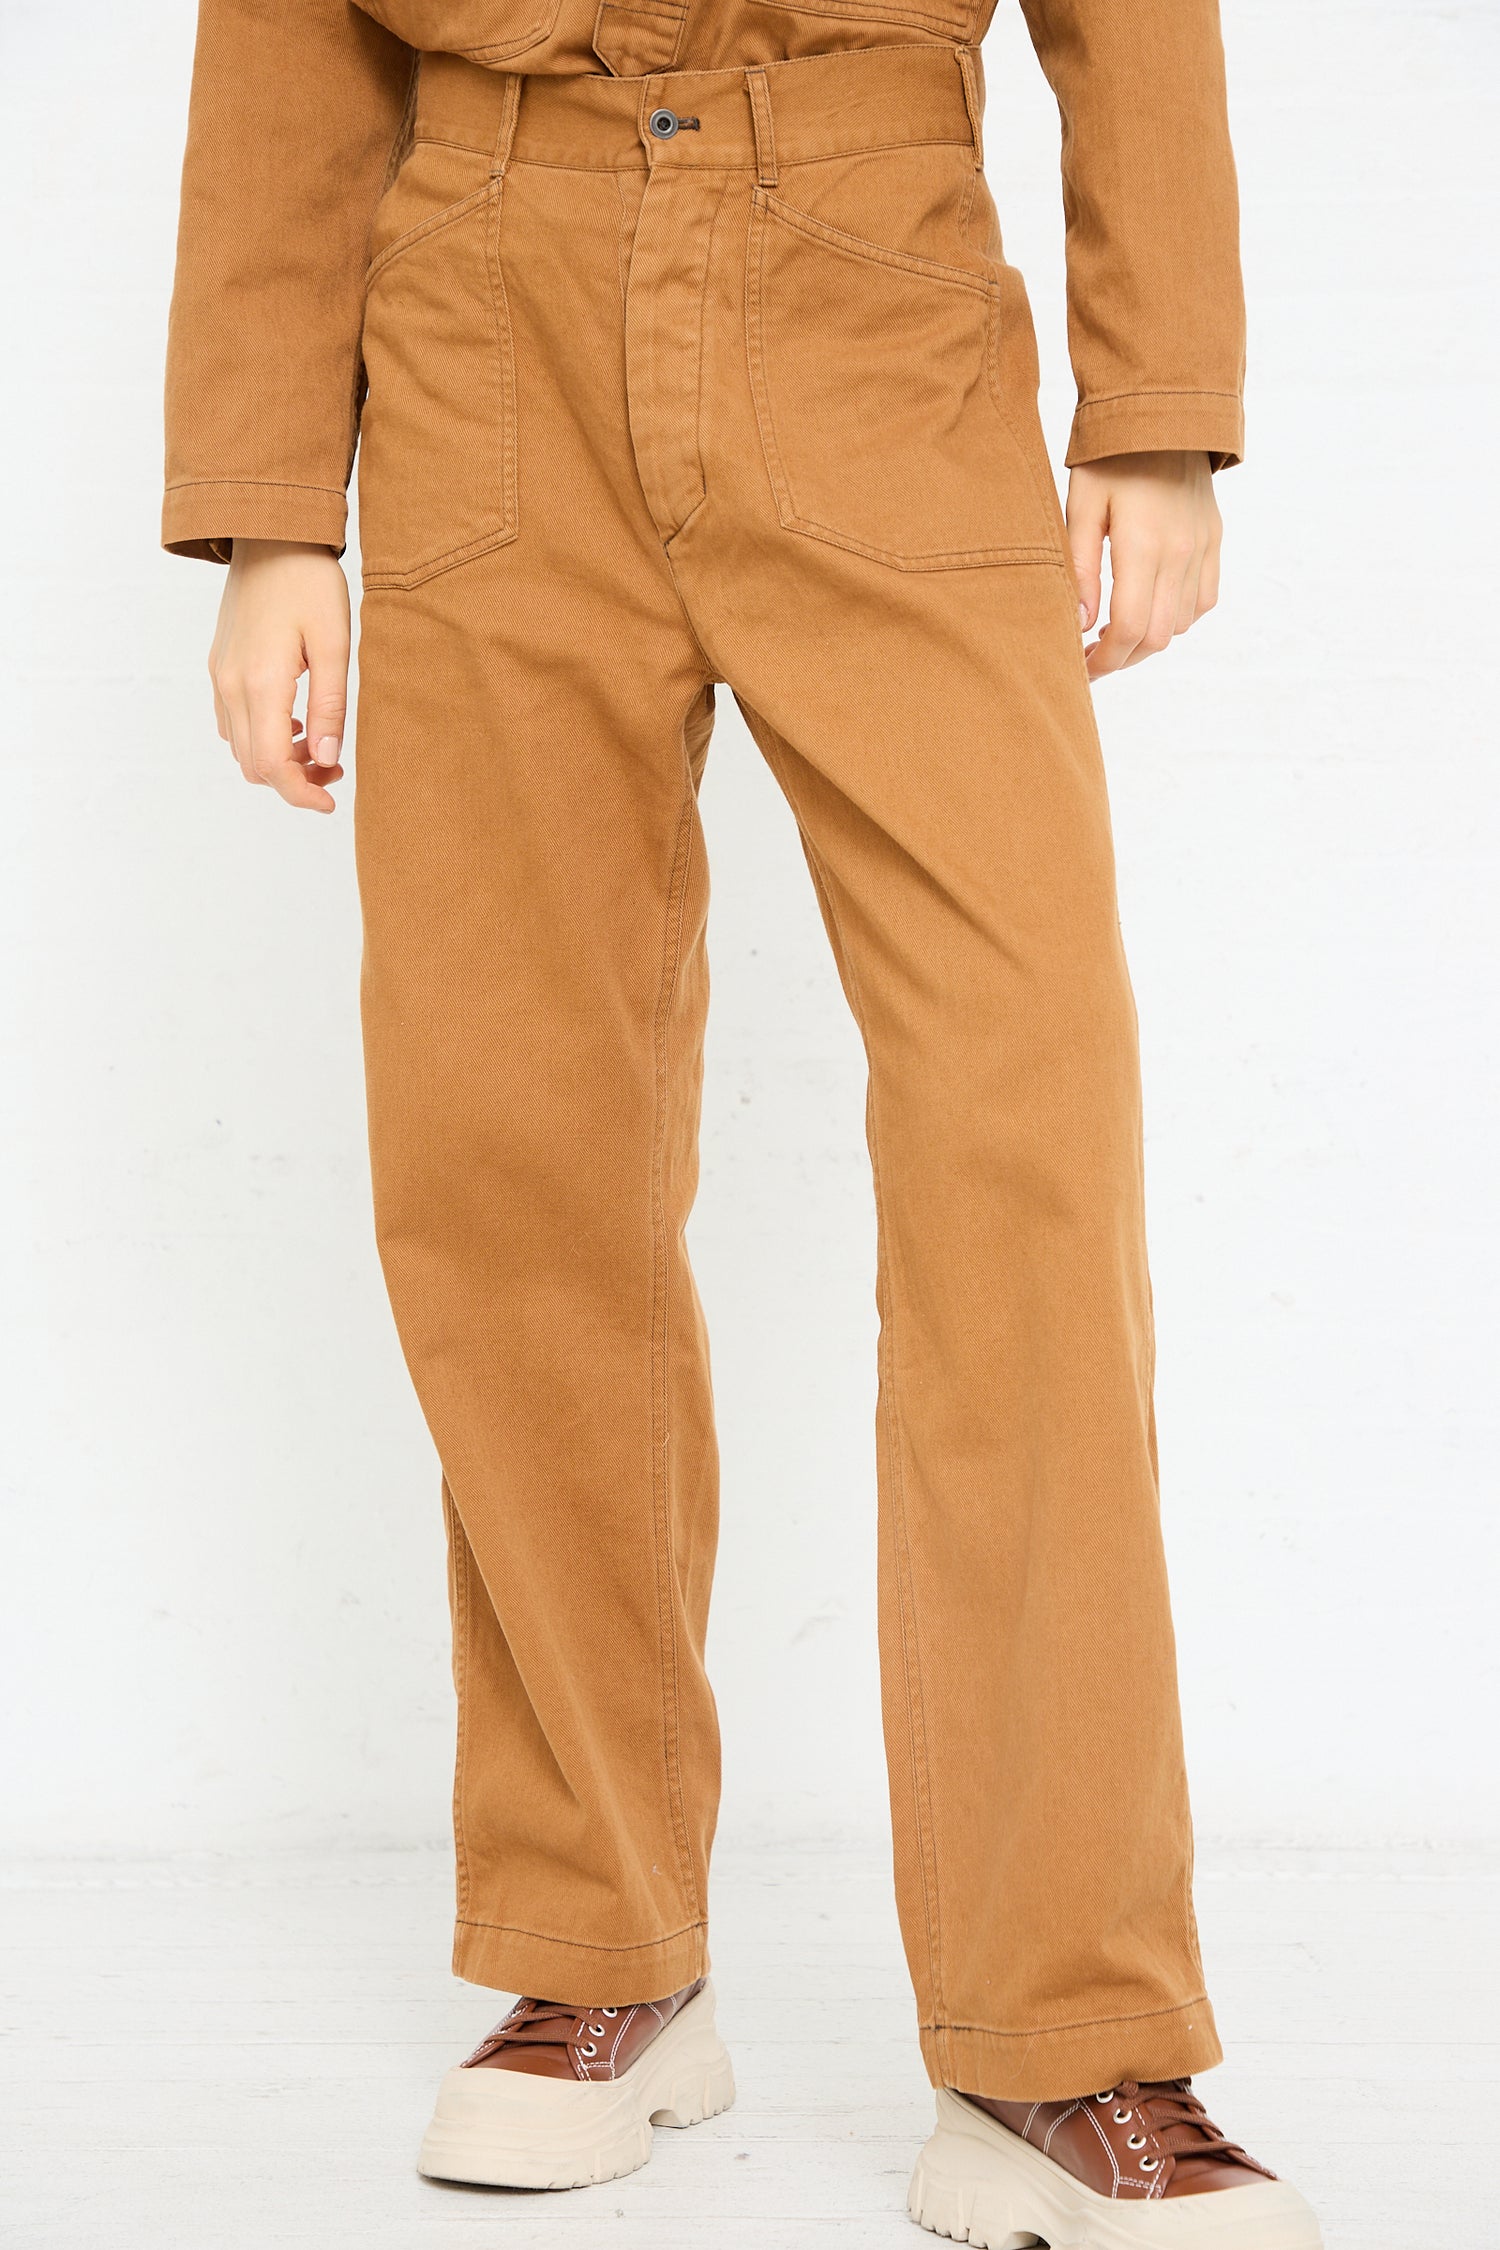 A person wearing Chimala Classic Drill US Army Work Trouser in Camel and two-tone sneakers.